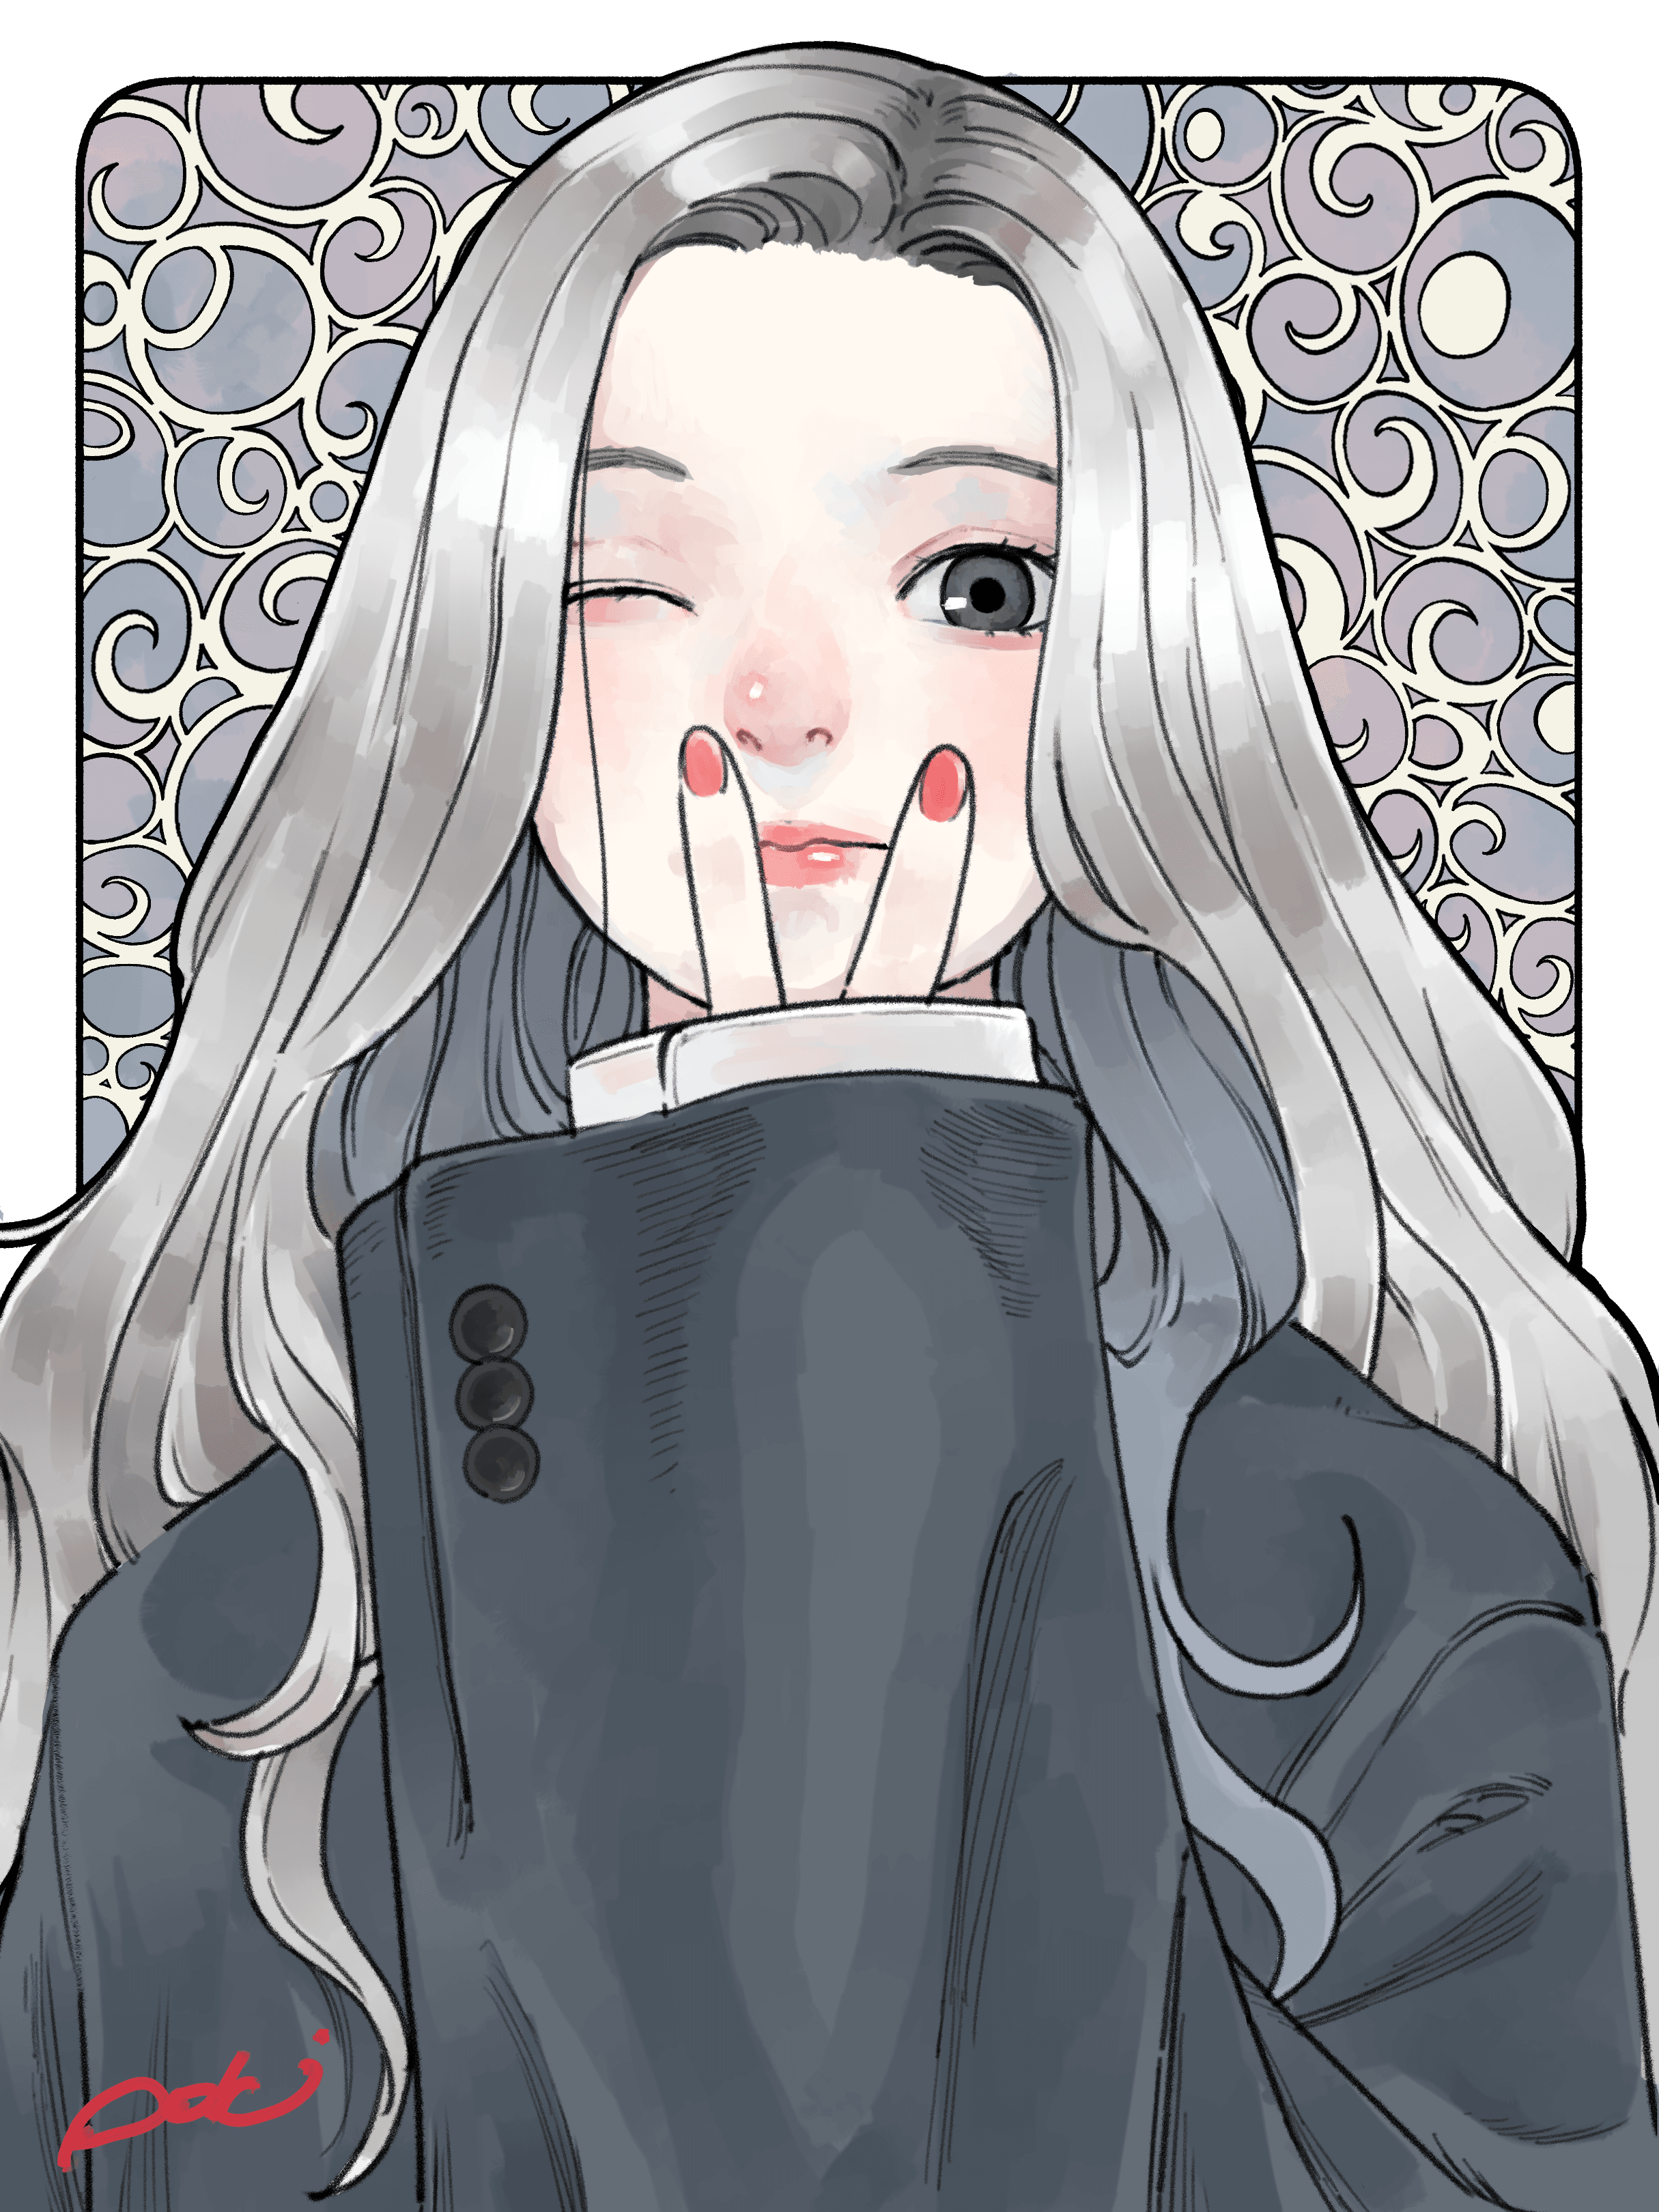 Silver-haired girl